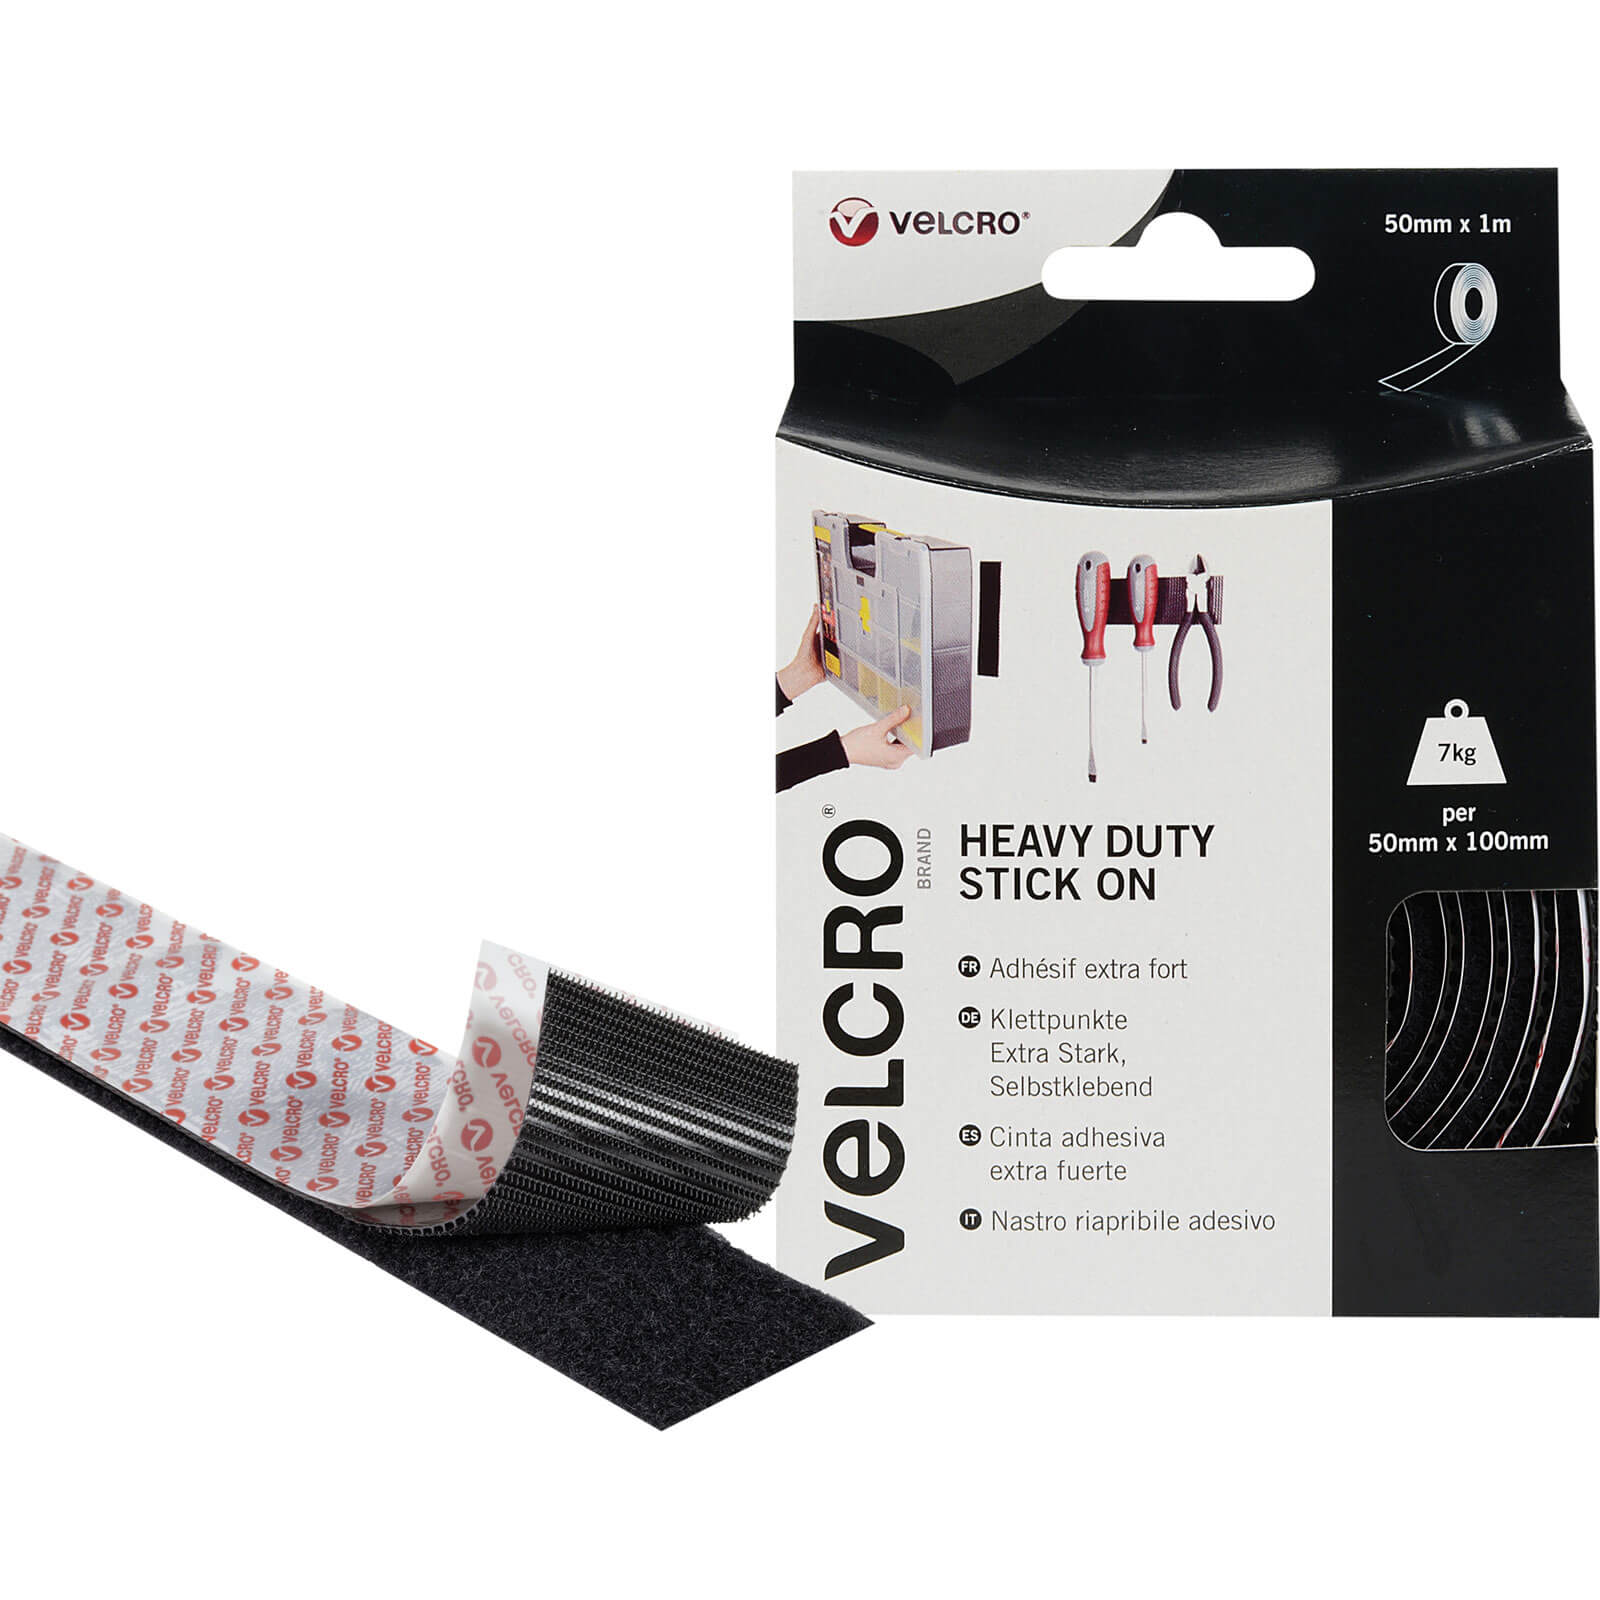 Photo of Velcro Heavy Duty Stick On Tape Black 50mm 1m Pack Of 1